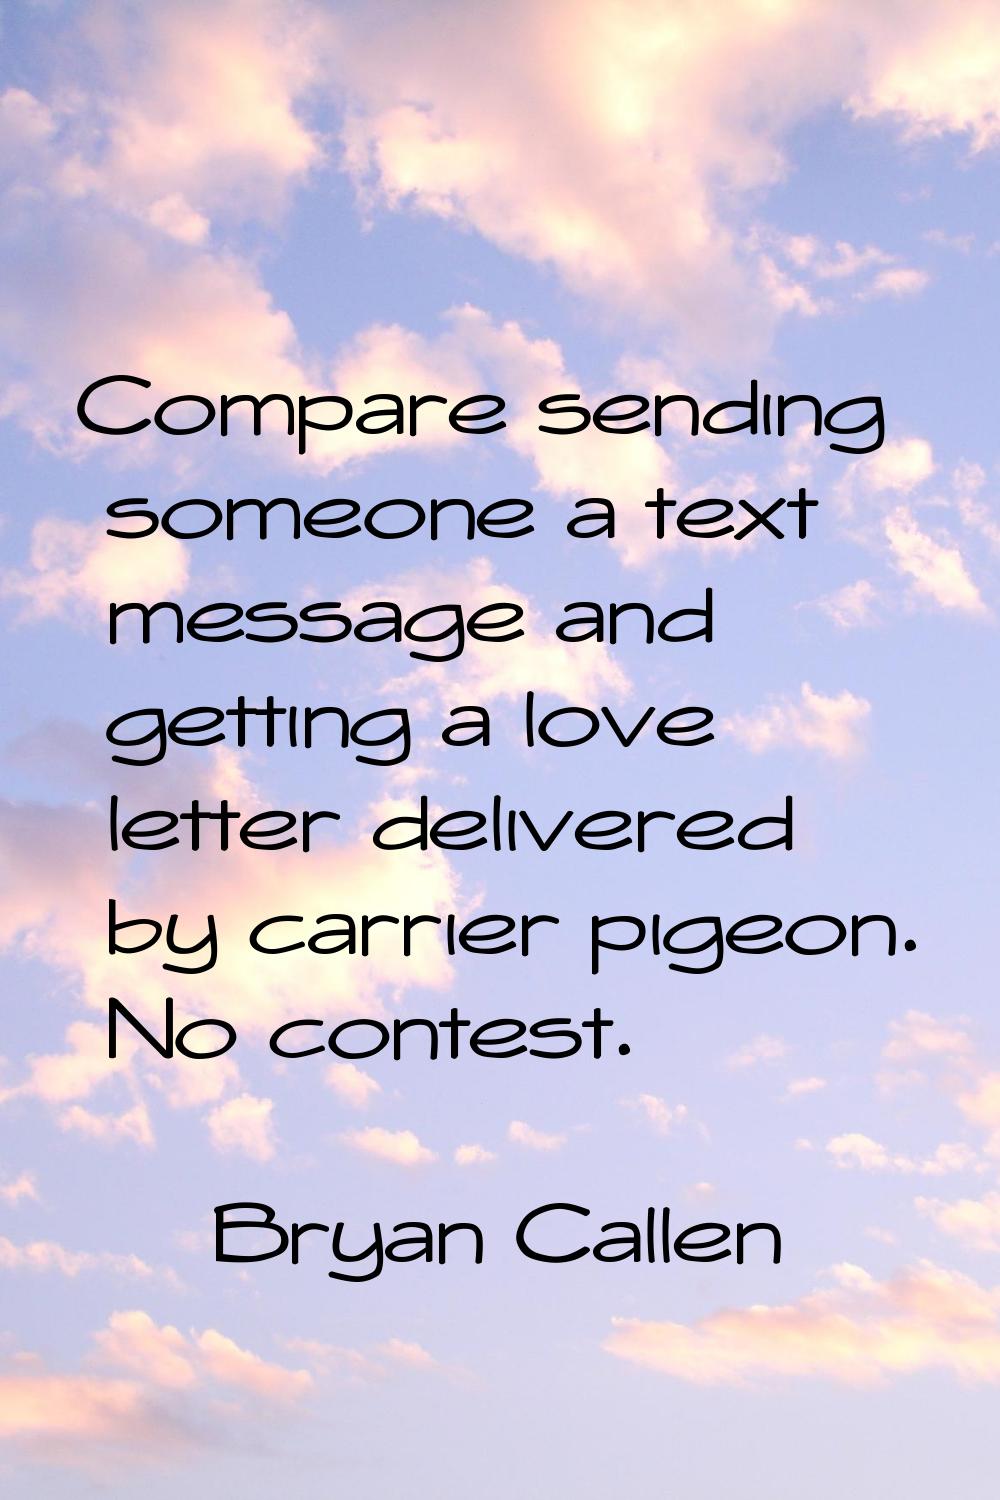 Compare sending someone a text message and getting a love letter delivered by carrier pigeon. No co